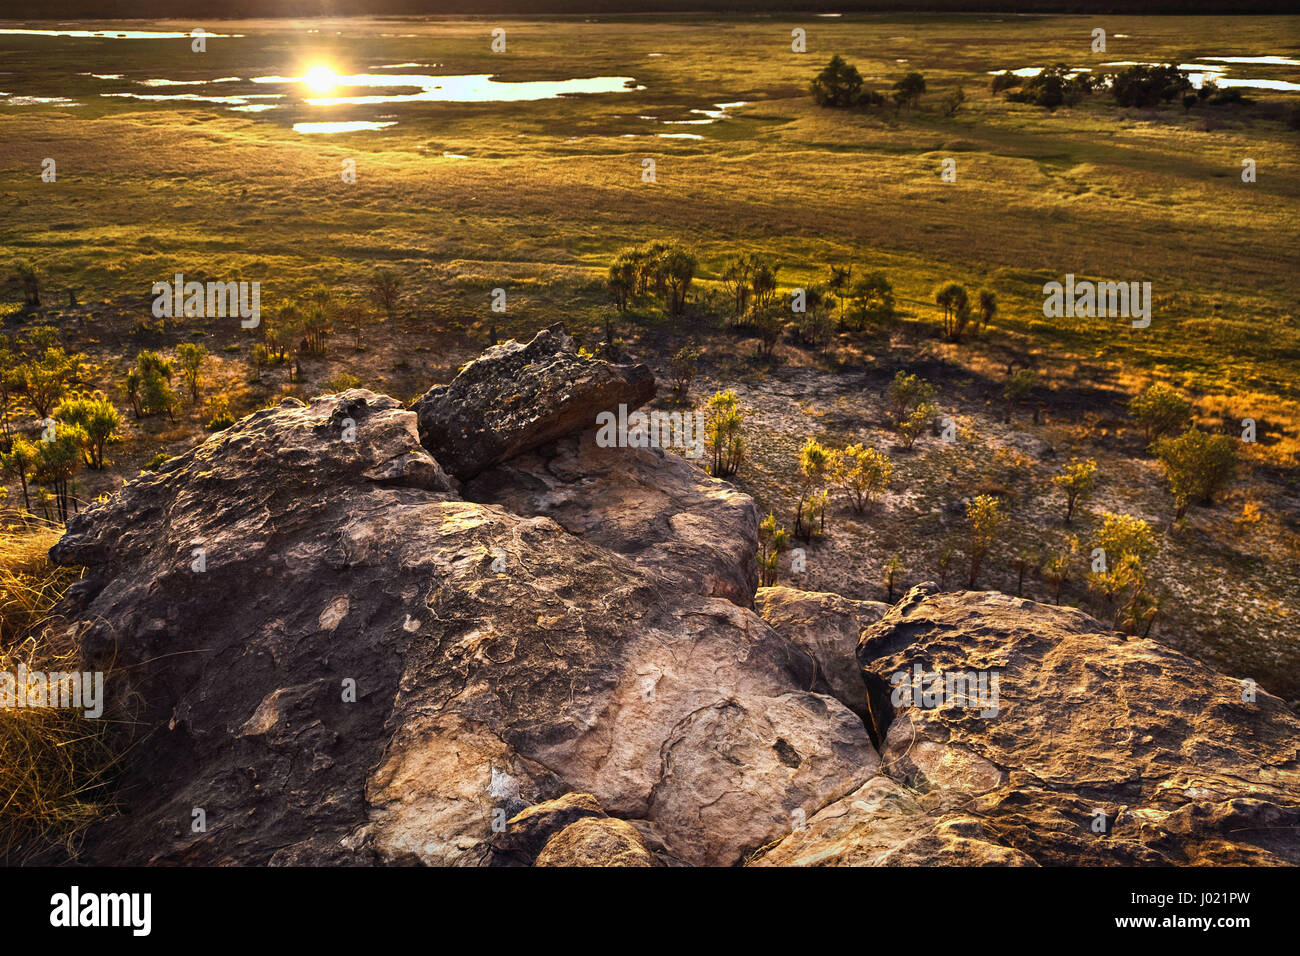 Dusk at Ubirr rock looking down at the sun reflected in the waters of the Nadab floodplains. Northern Territory, Australia Stock Photo